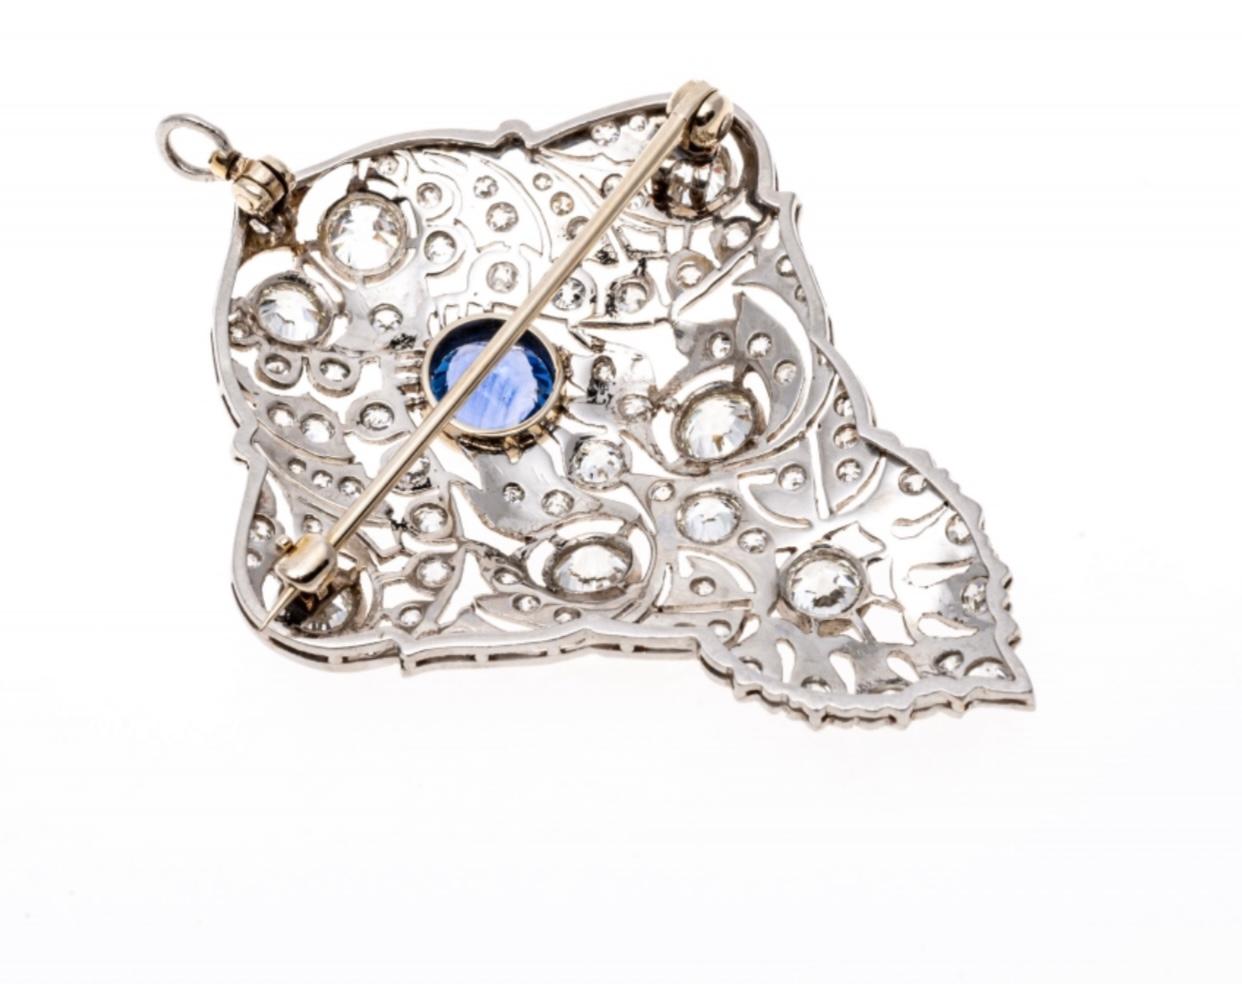 This amazing antique Edwardian era brooch (and pendant) contains a center round faceted, cornflower blue color natural sapphire from Sri Lanka, approximately 0.94 CTS and bezel set. Surrounding the sapphire are scrolls of openwork filigree, milgrain